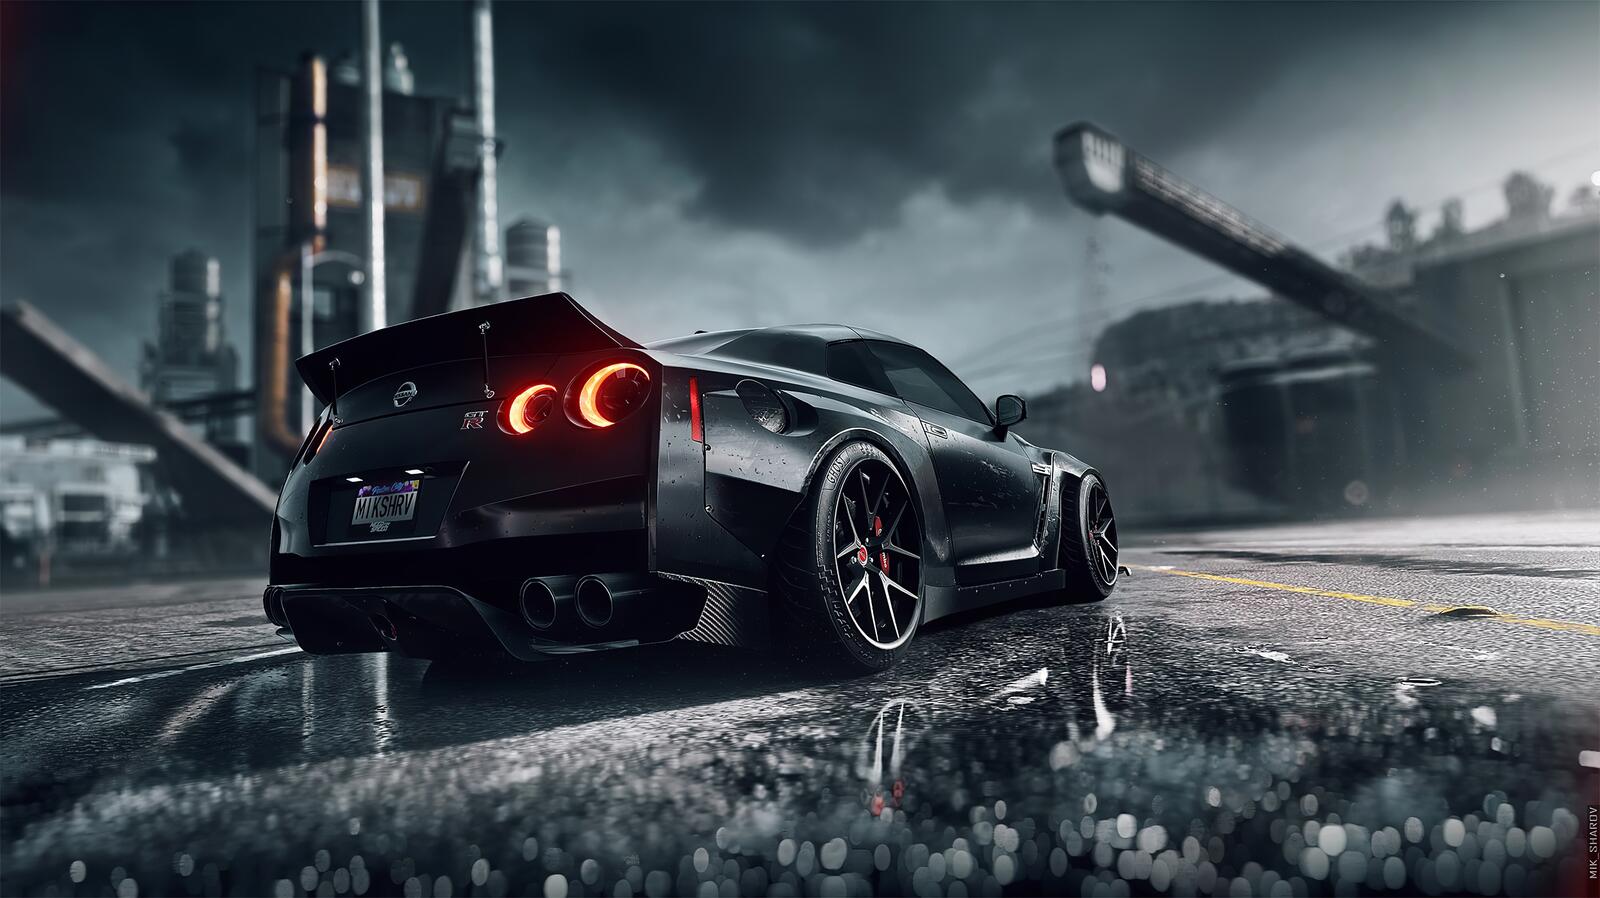 Free photo Nissan GTR in black color in Need For Speed Heat game